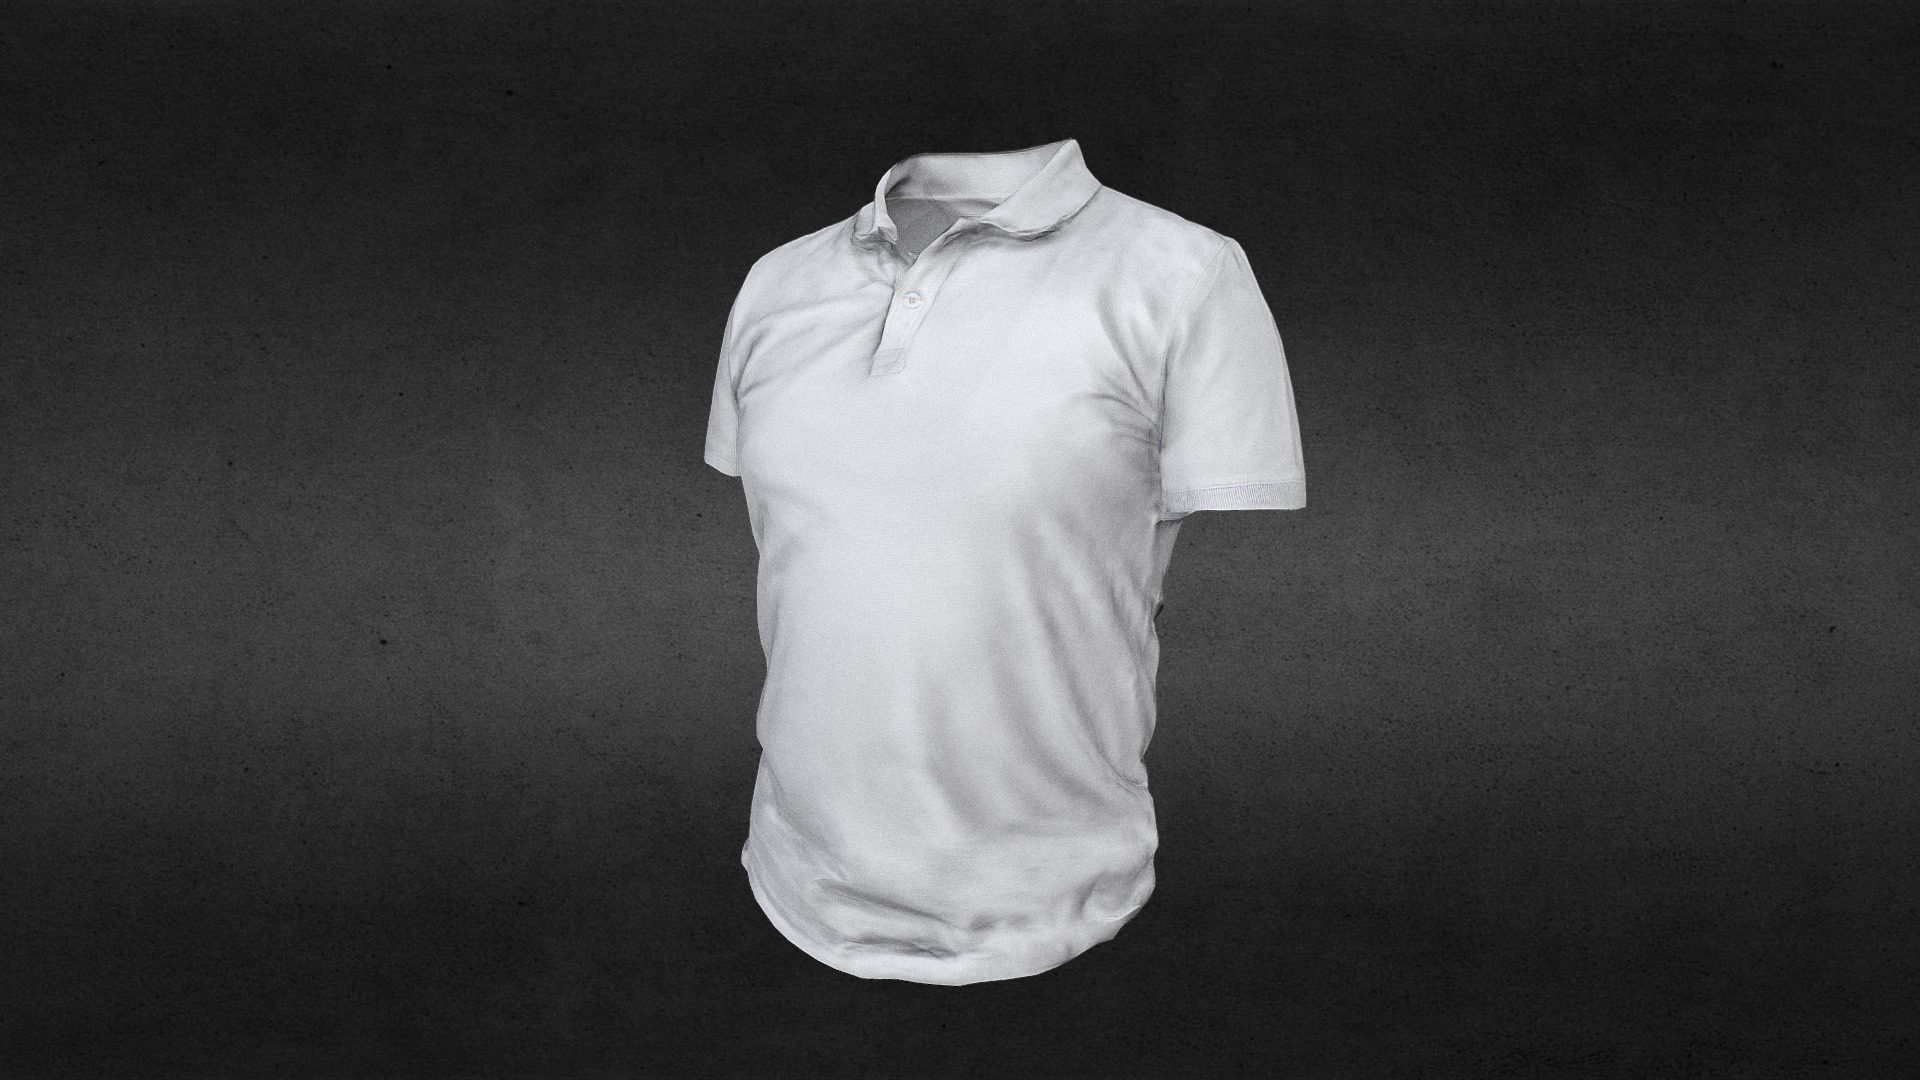 3D model Low poly t-shirt - This is a 3D model of the Low poly t-shirt. The 3D model is about a white shirt on a black surface.